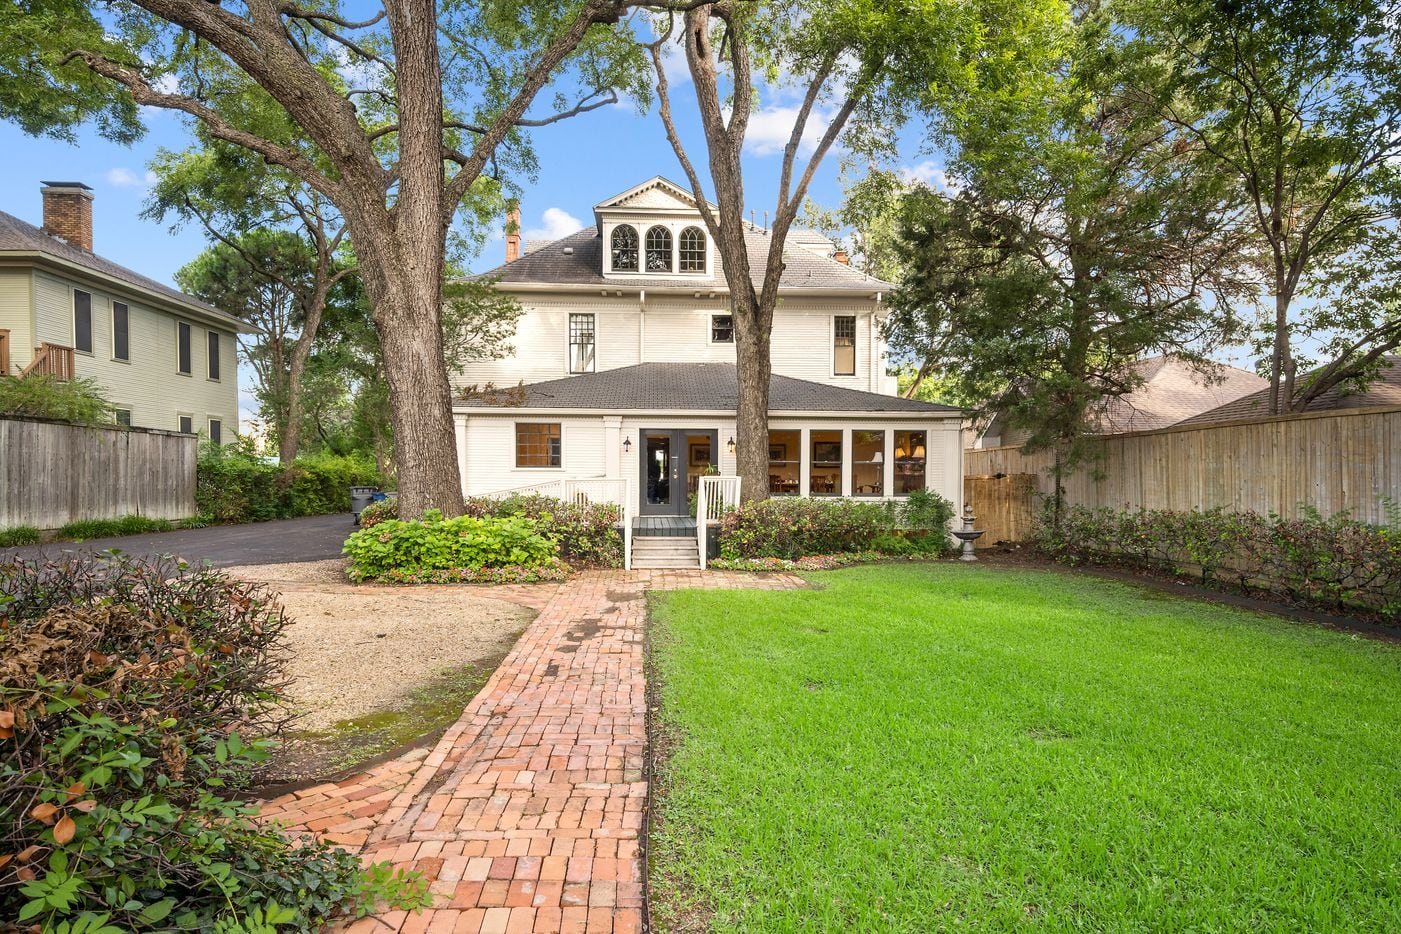 Take a look at the home at 4125 Junius St. in Dallas.